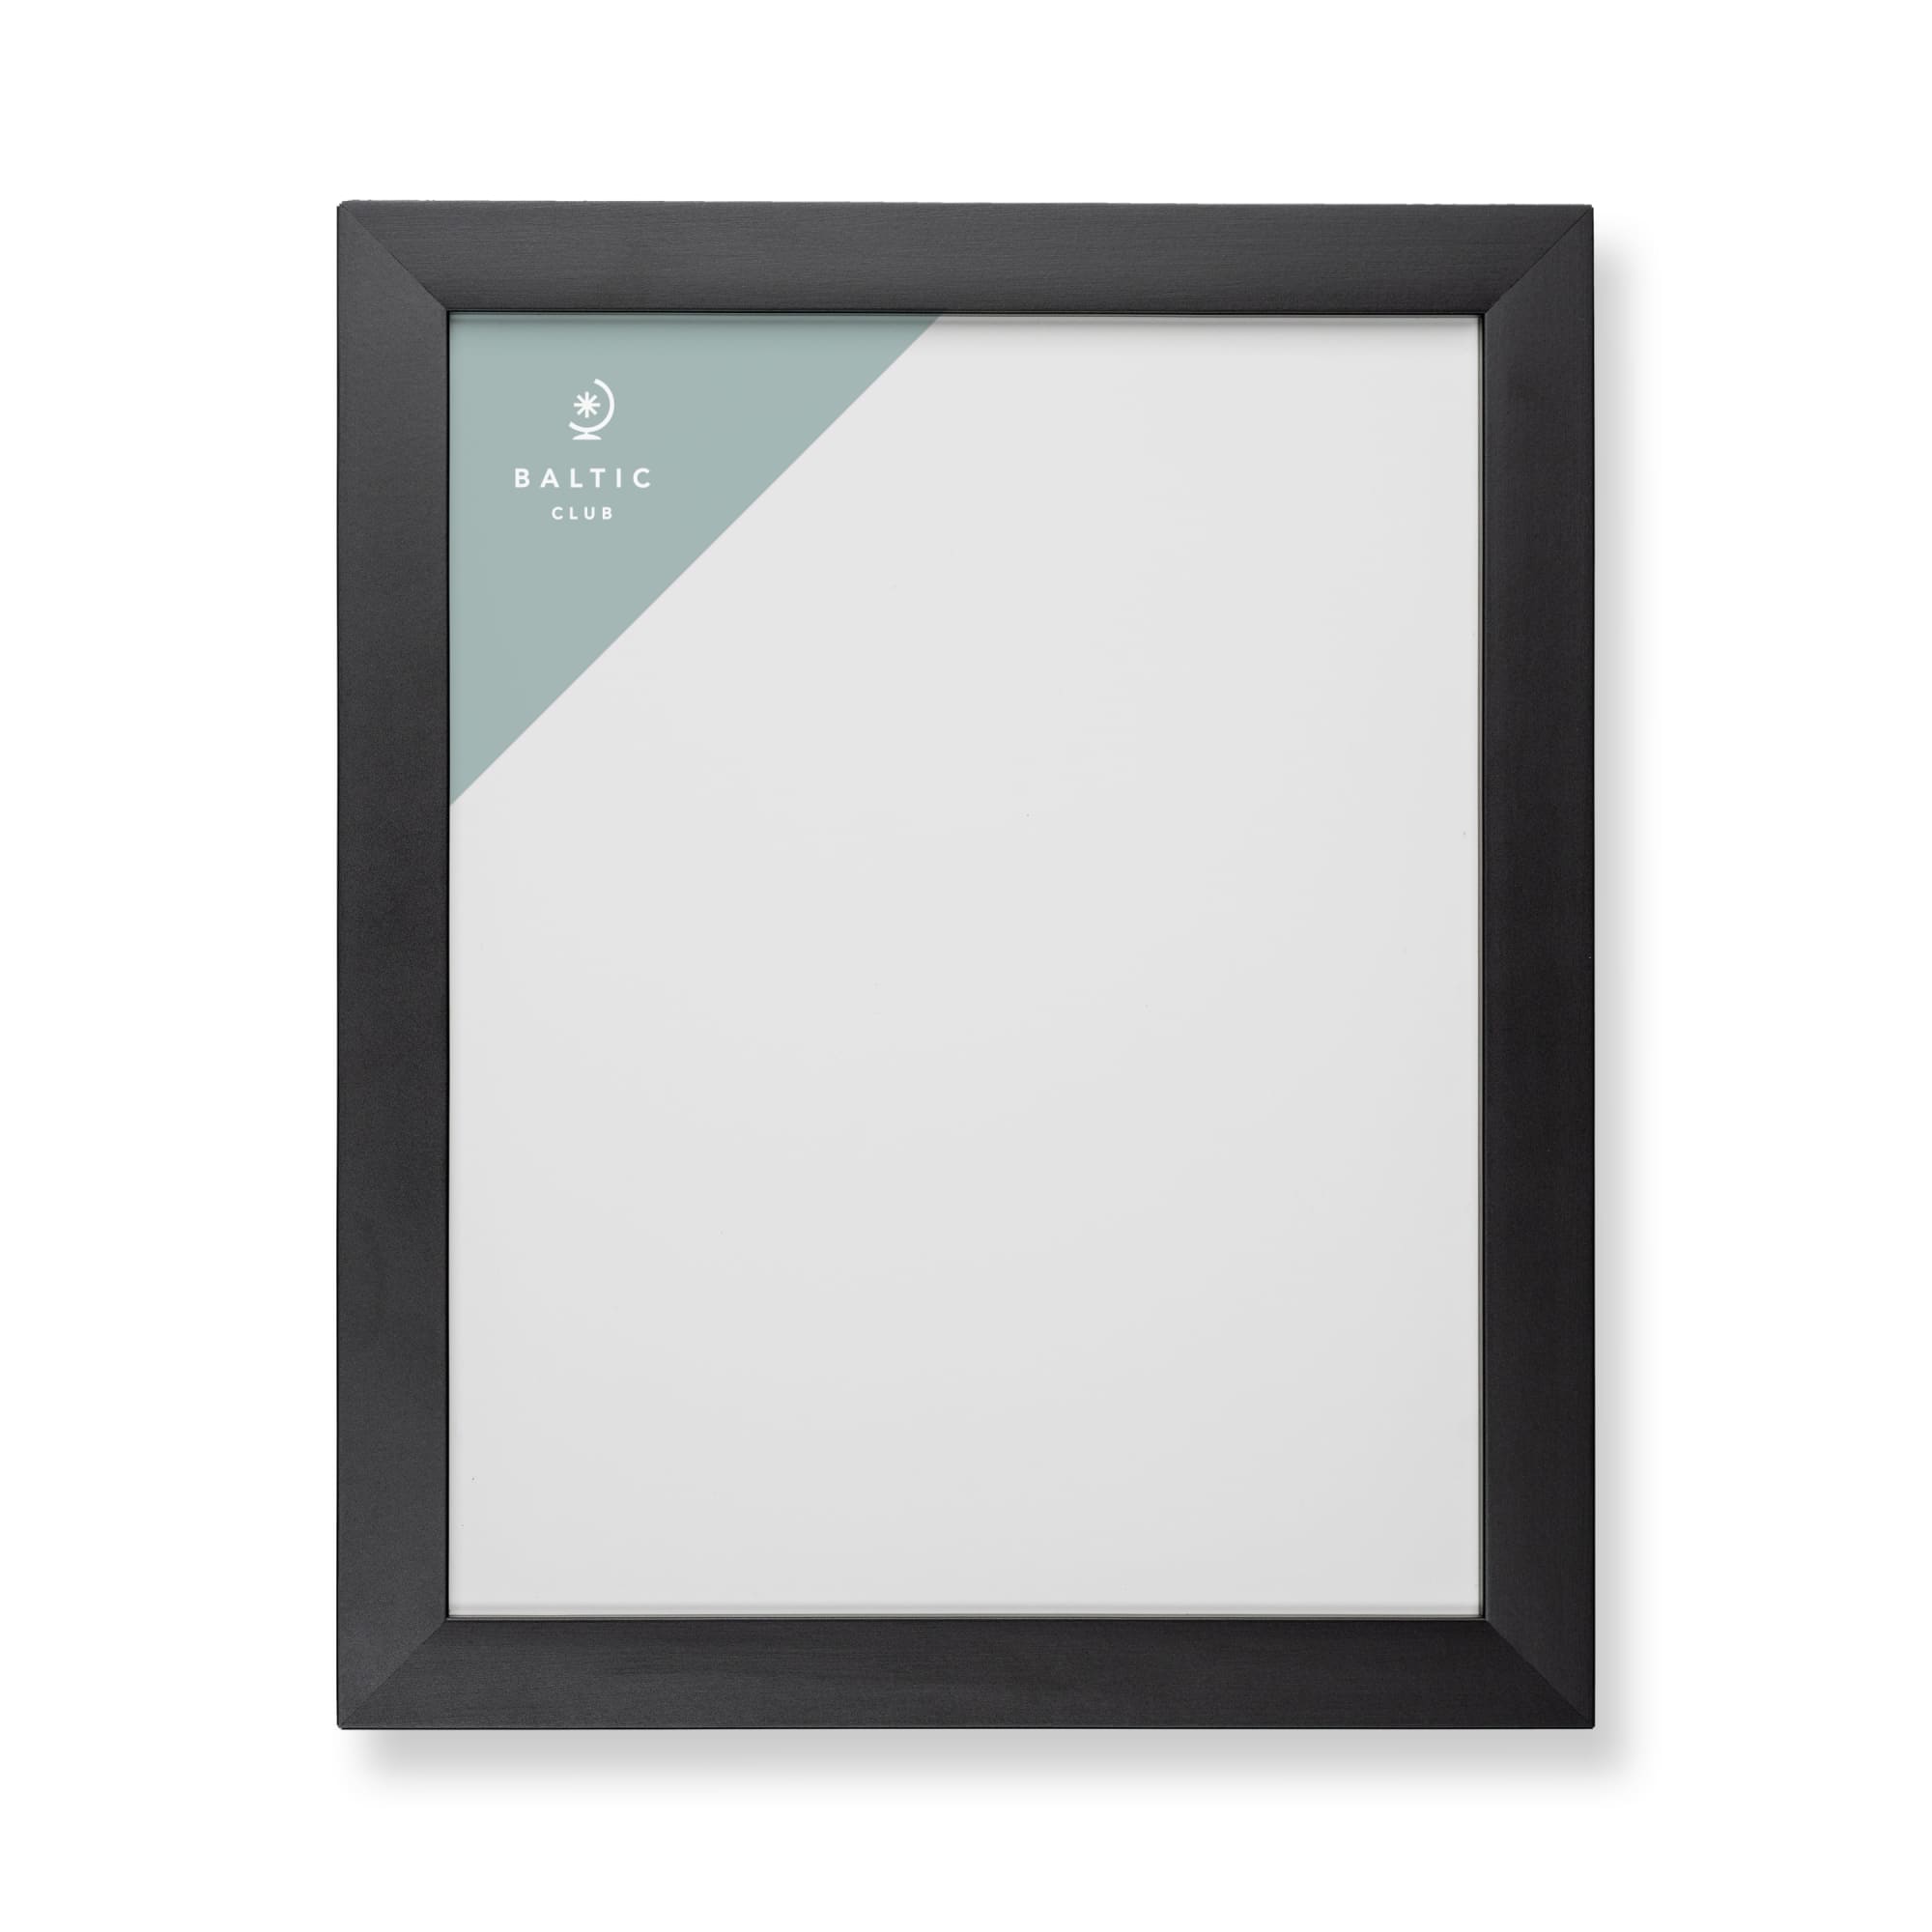 Painted wood frame - Black | The Baltic Club